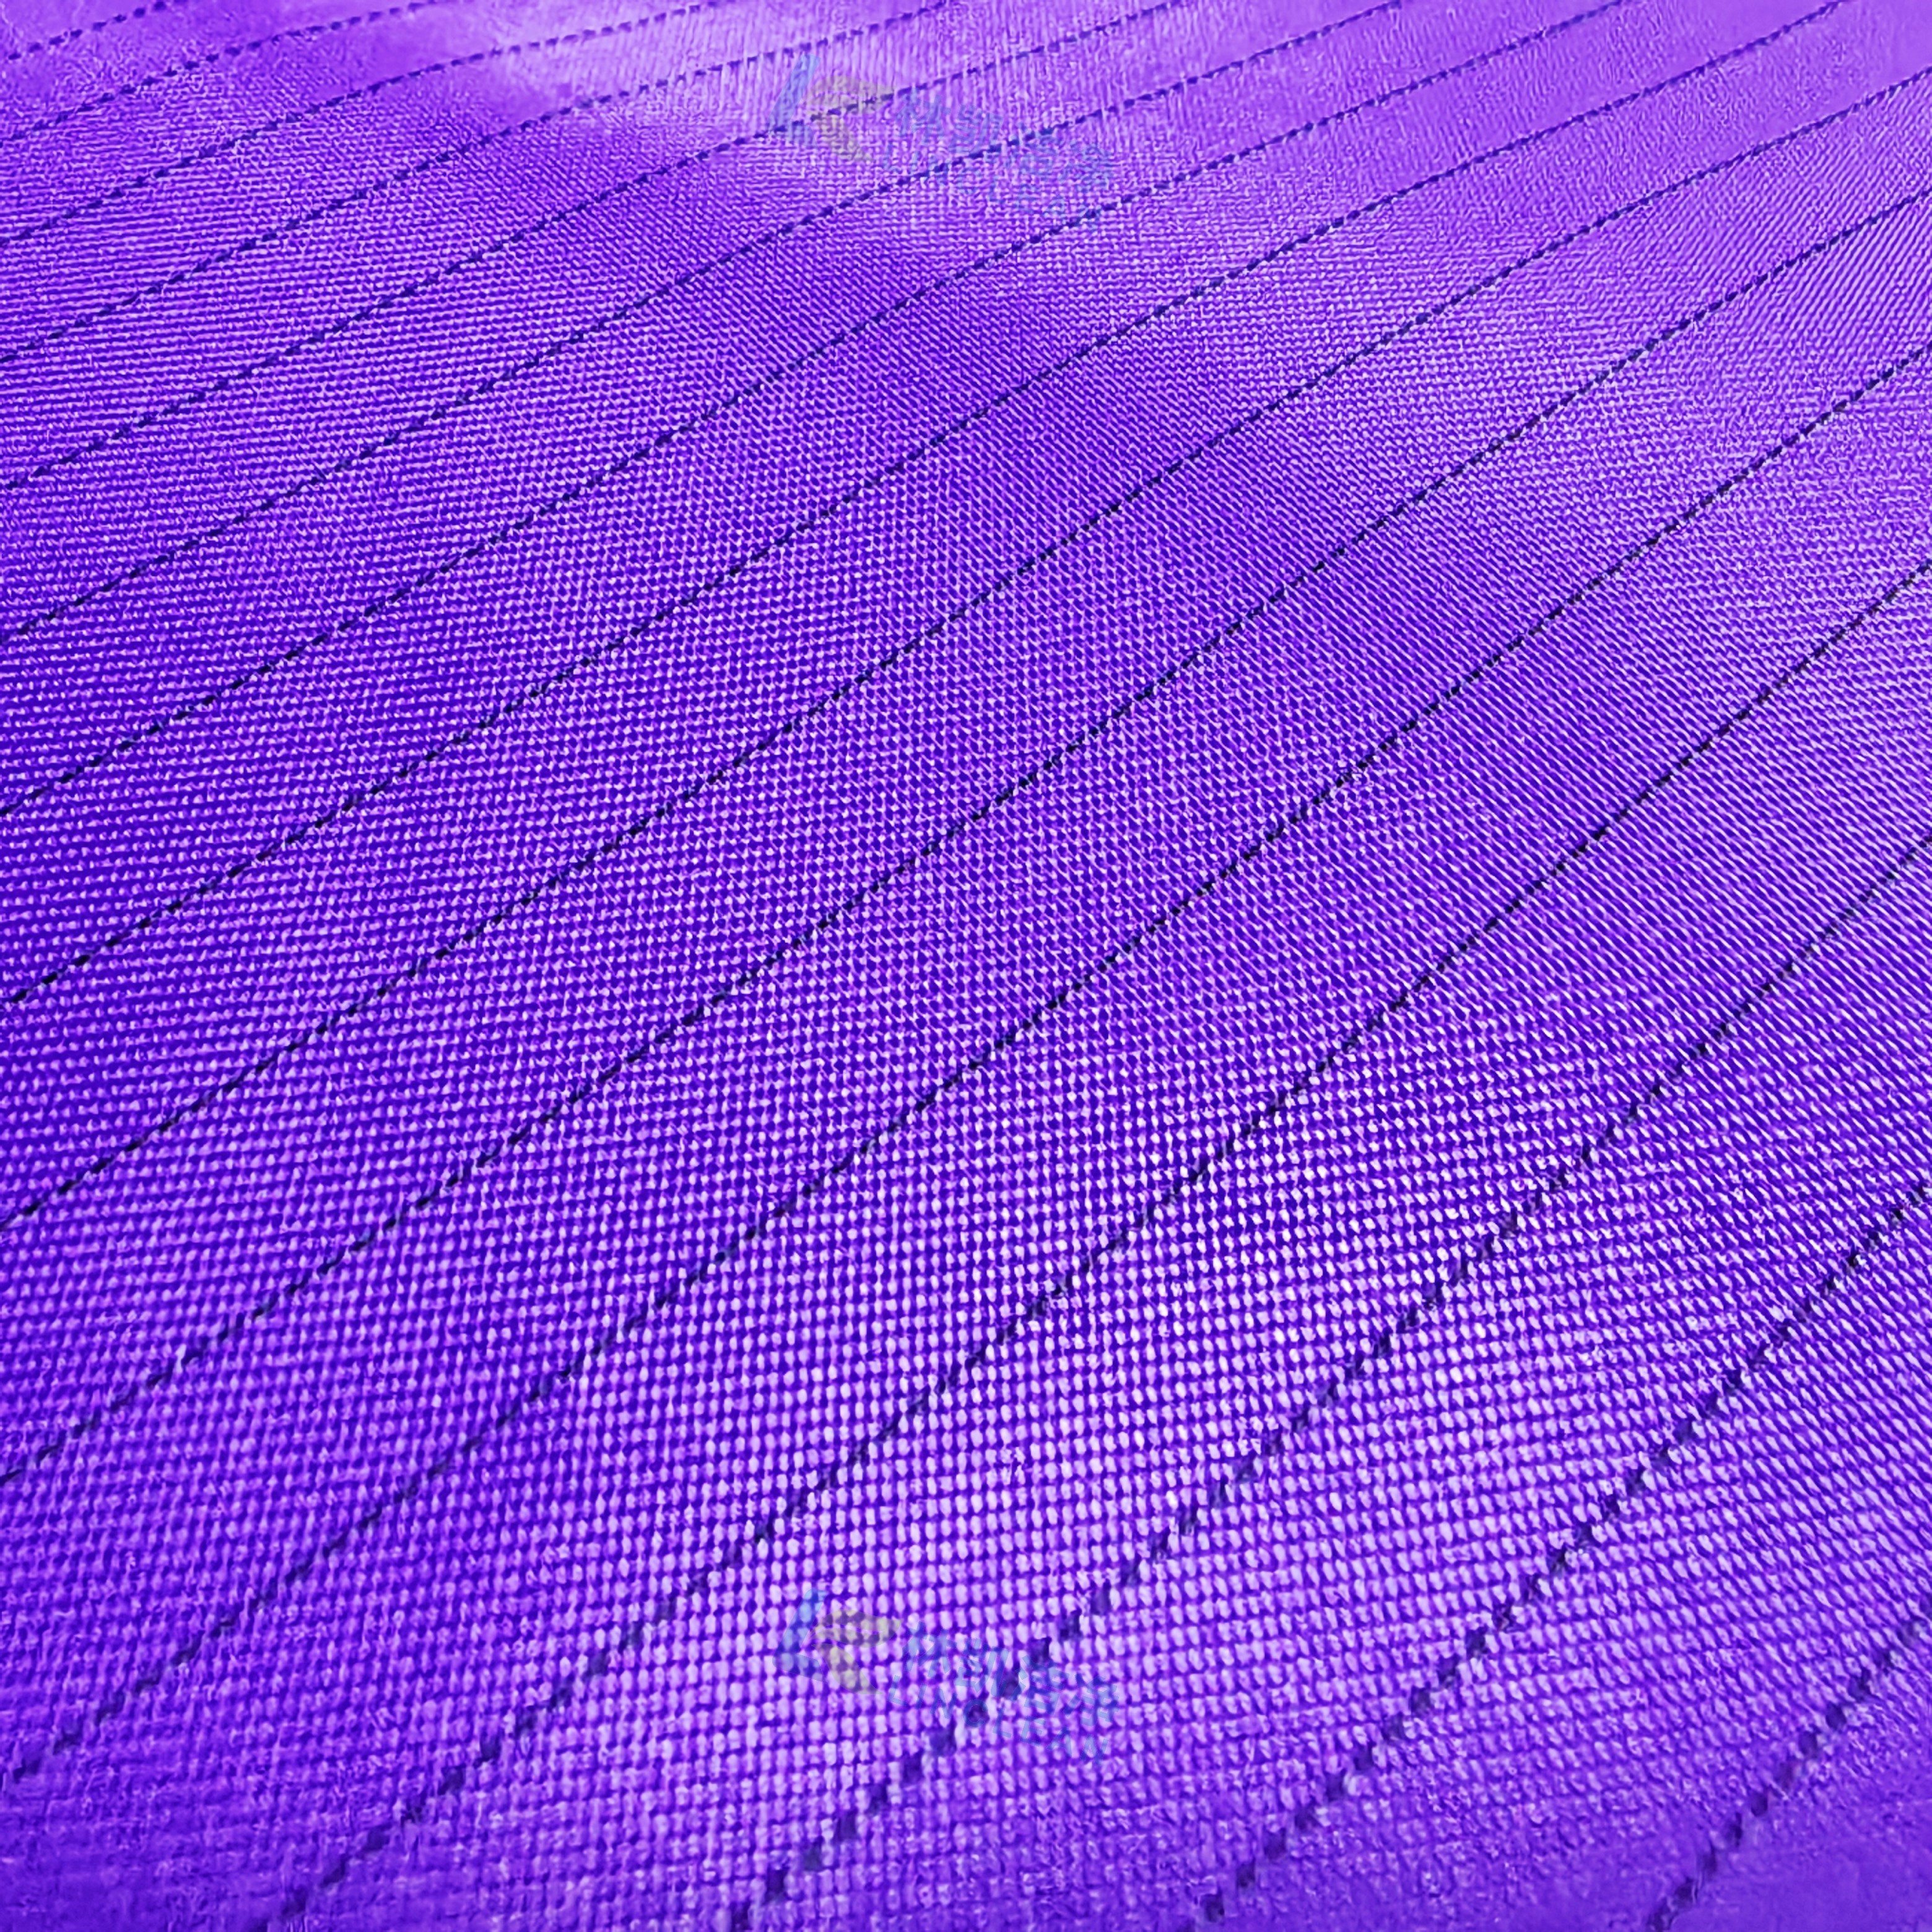 5mm Stripe Purple Polyester Anti-static ESD Woven Fabric for Antistatic Clothing